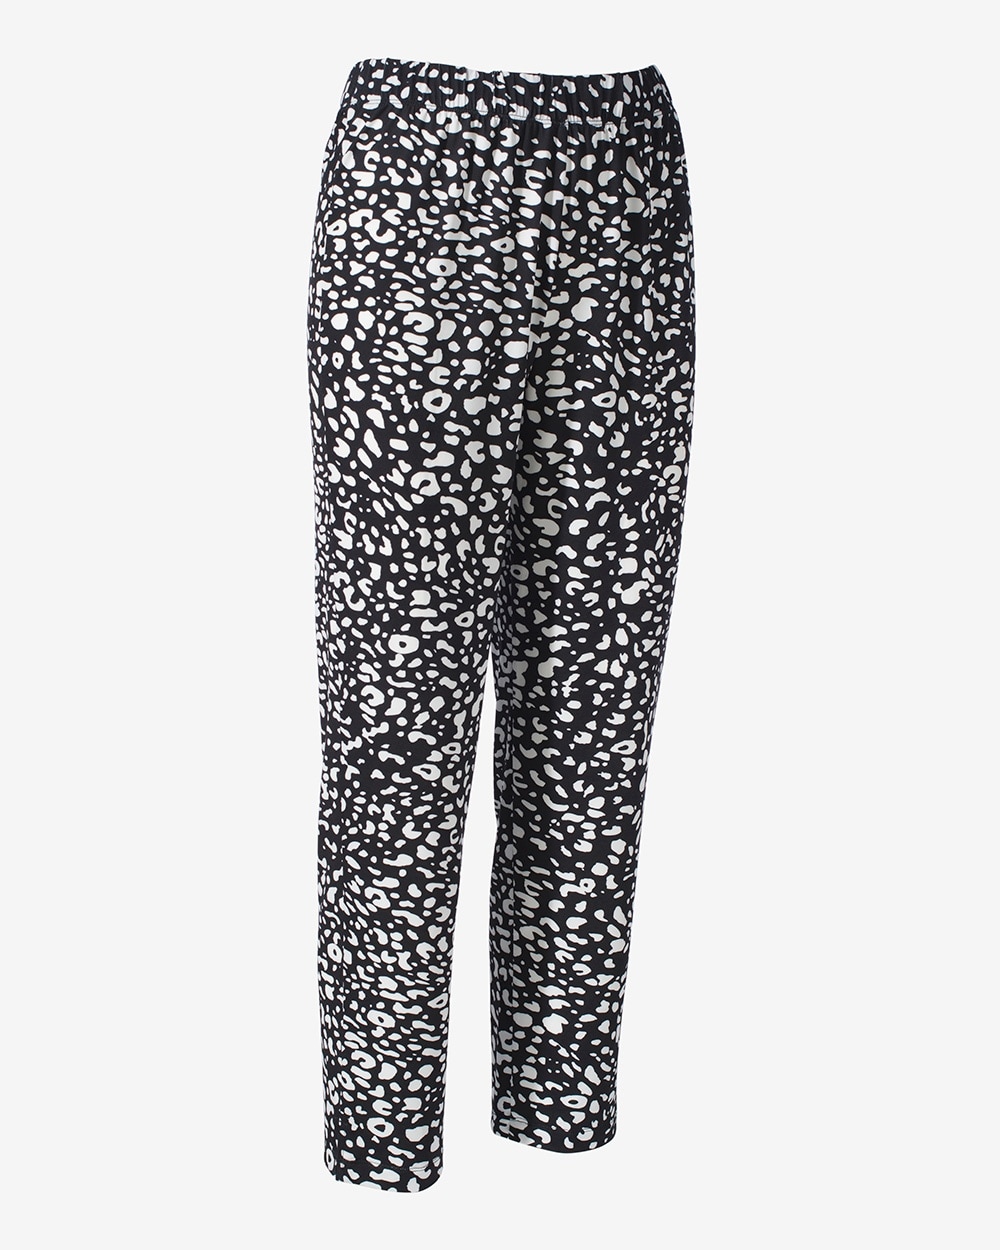 Easywear Abstract Animal Jade Ankle Pants